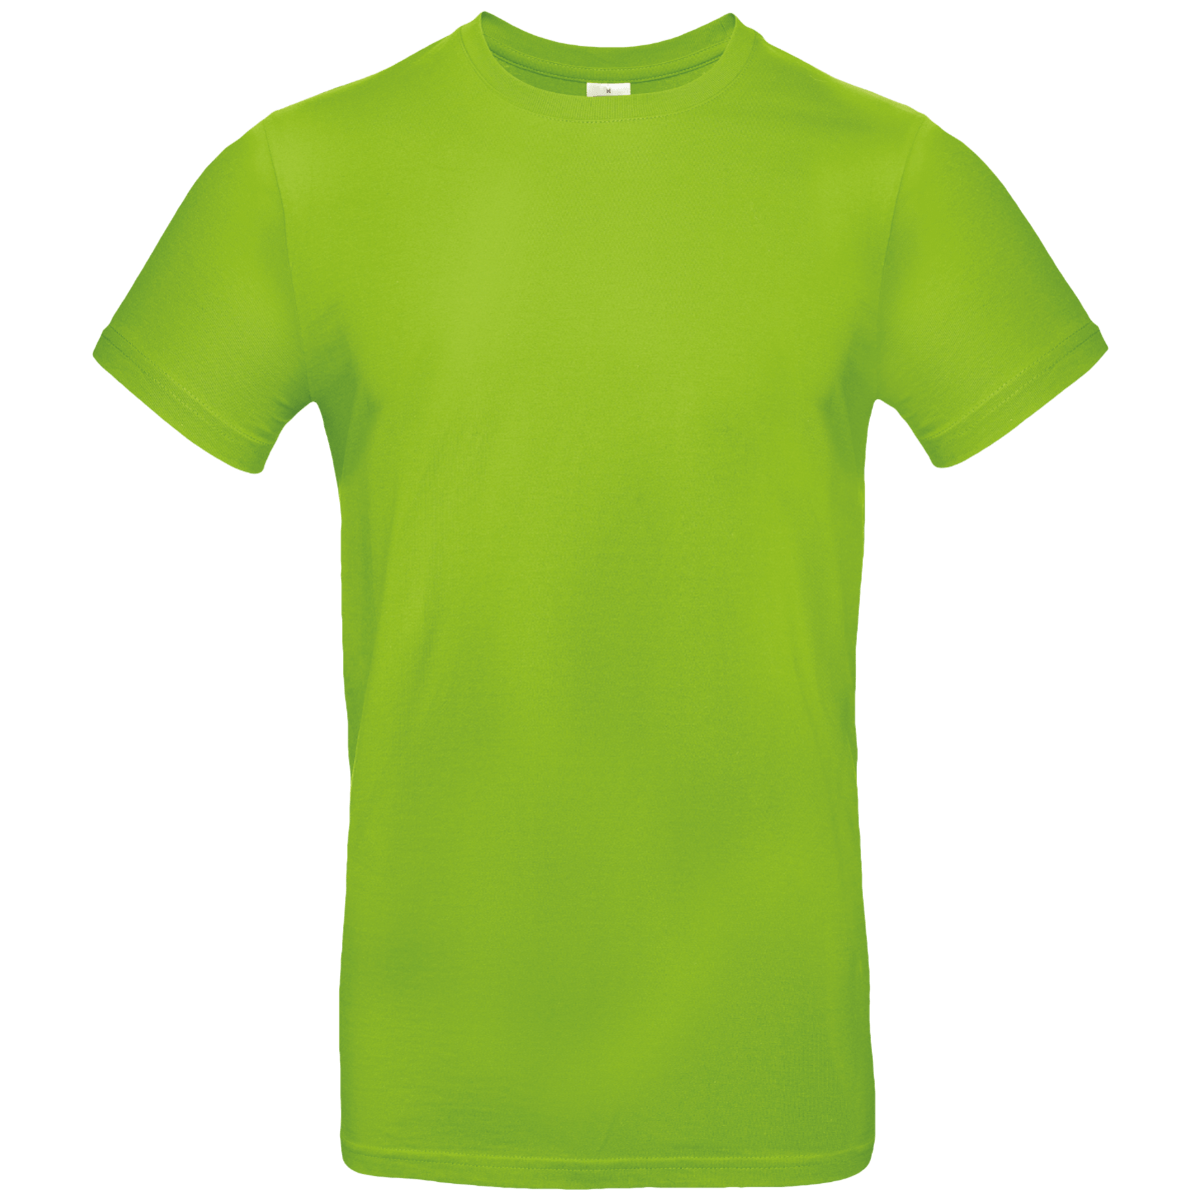 T-Shirt B&c 190 Personnalisable Sur Tunetoo Orchid Green